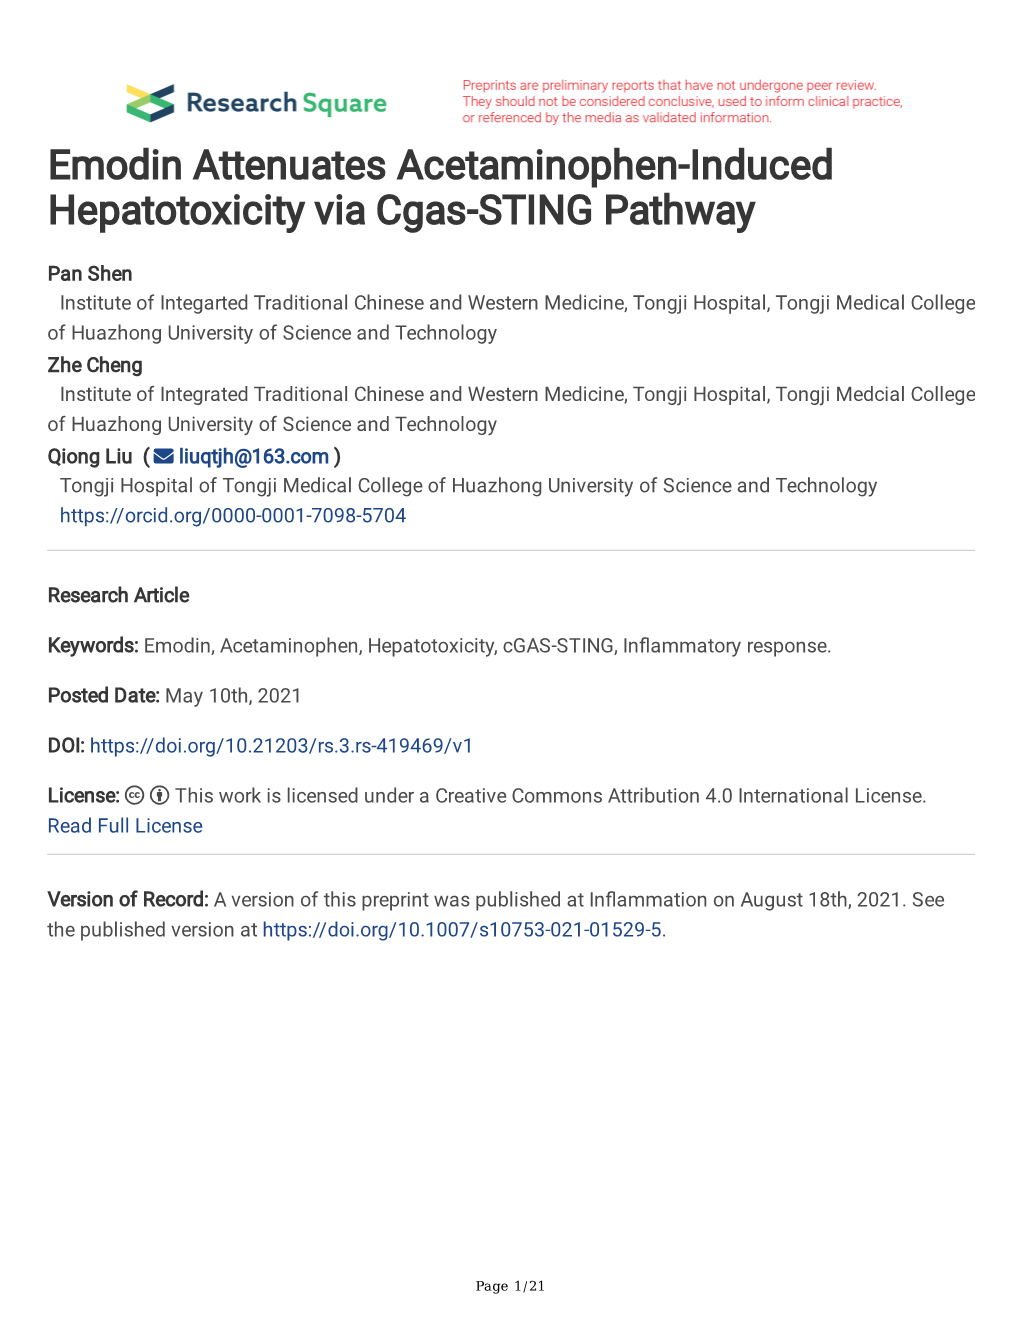 Emodin Attenuates Acetaminophen-Induced Hepatotoxicity Via Cgas-STING Pathway